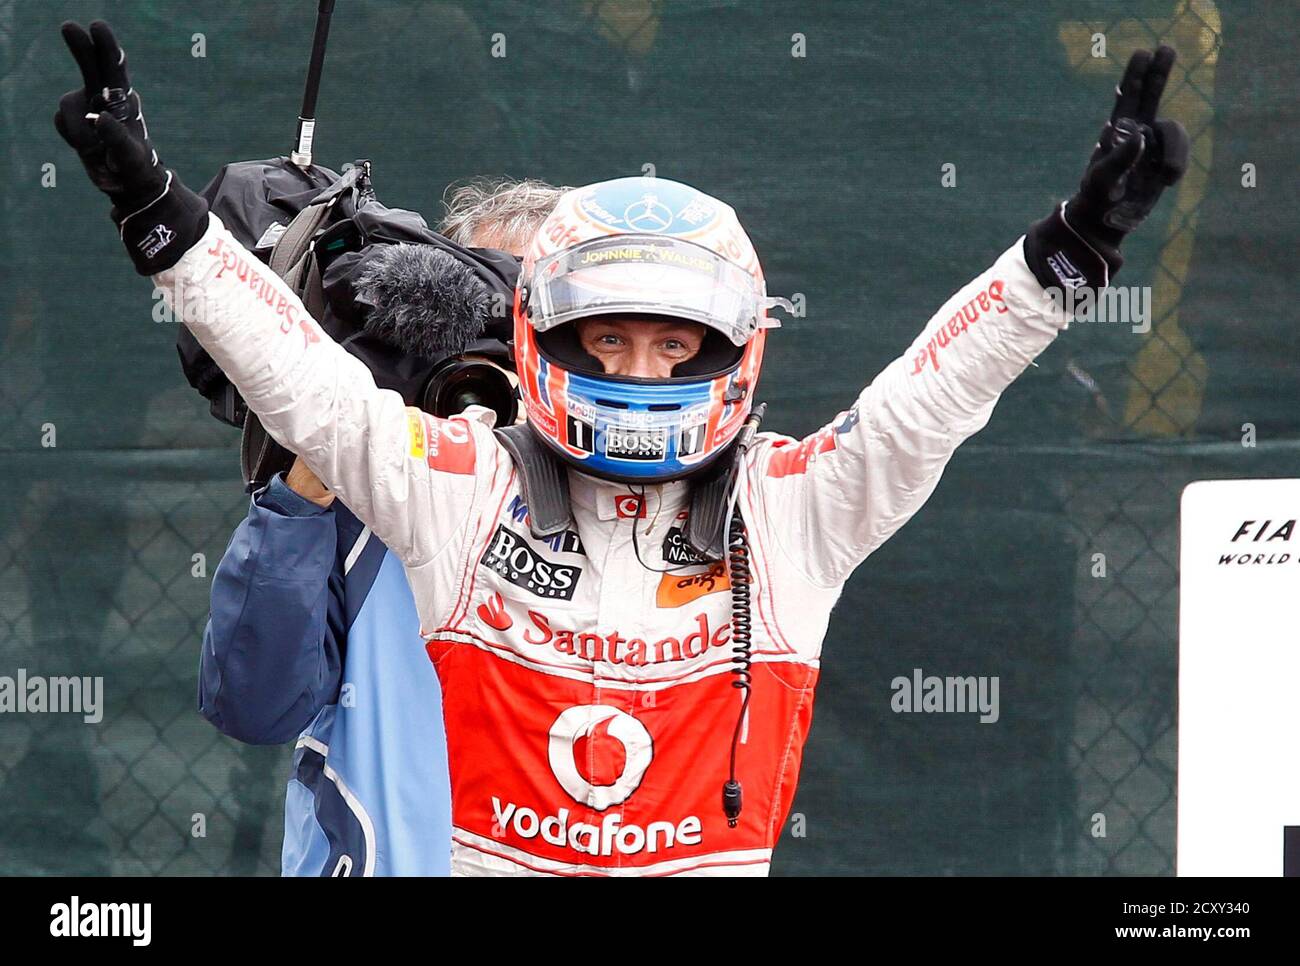 McLaren Formula One driver Jenson Button of Britain celebrates after winning the Canadian F1 Grand Prix at the Circuit Gilles Villeneuve in Montreal June 12, 2011.    REUTERS/Chris Wattie (CANADA  - Tags: SPORT MOTOR RACING) Stock Photo